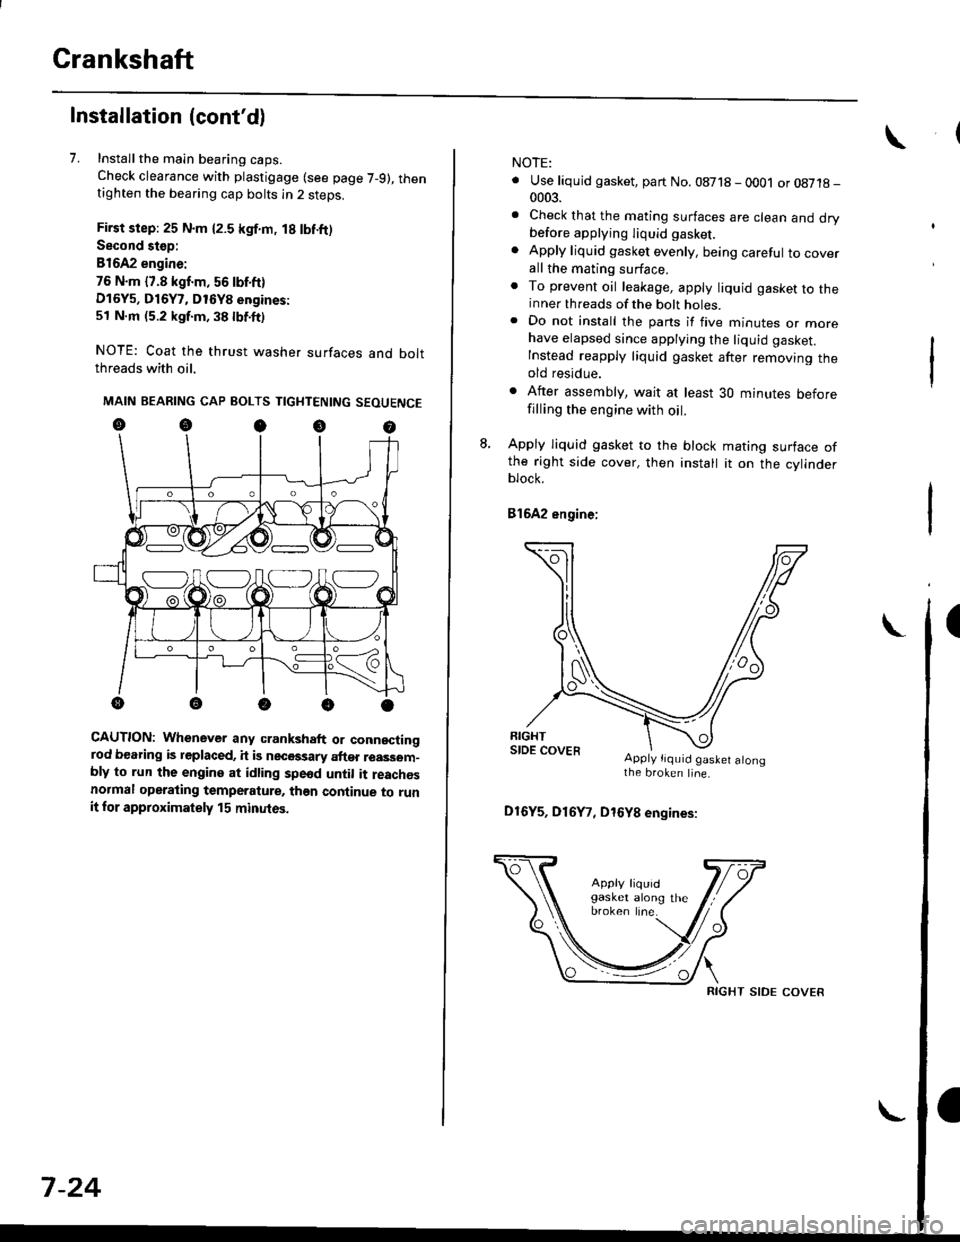 HONDA CIVIC 2000 6.G Repair Manual Crankshaft
Installation (contd)
7. Installthe main bearing caps.
Check clearance with plastigage (see page 7-9), thentighten the bearing cap bolts in 2 steps.
First step: 25 N.m {2.5 kgf.m, 18 lbf.ft